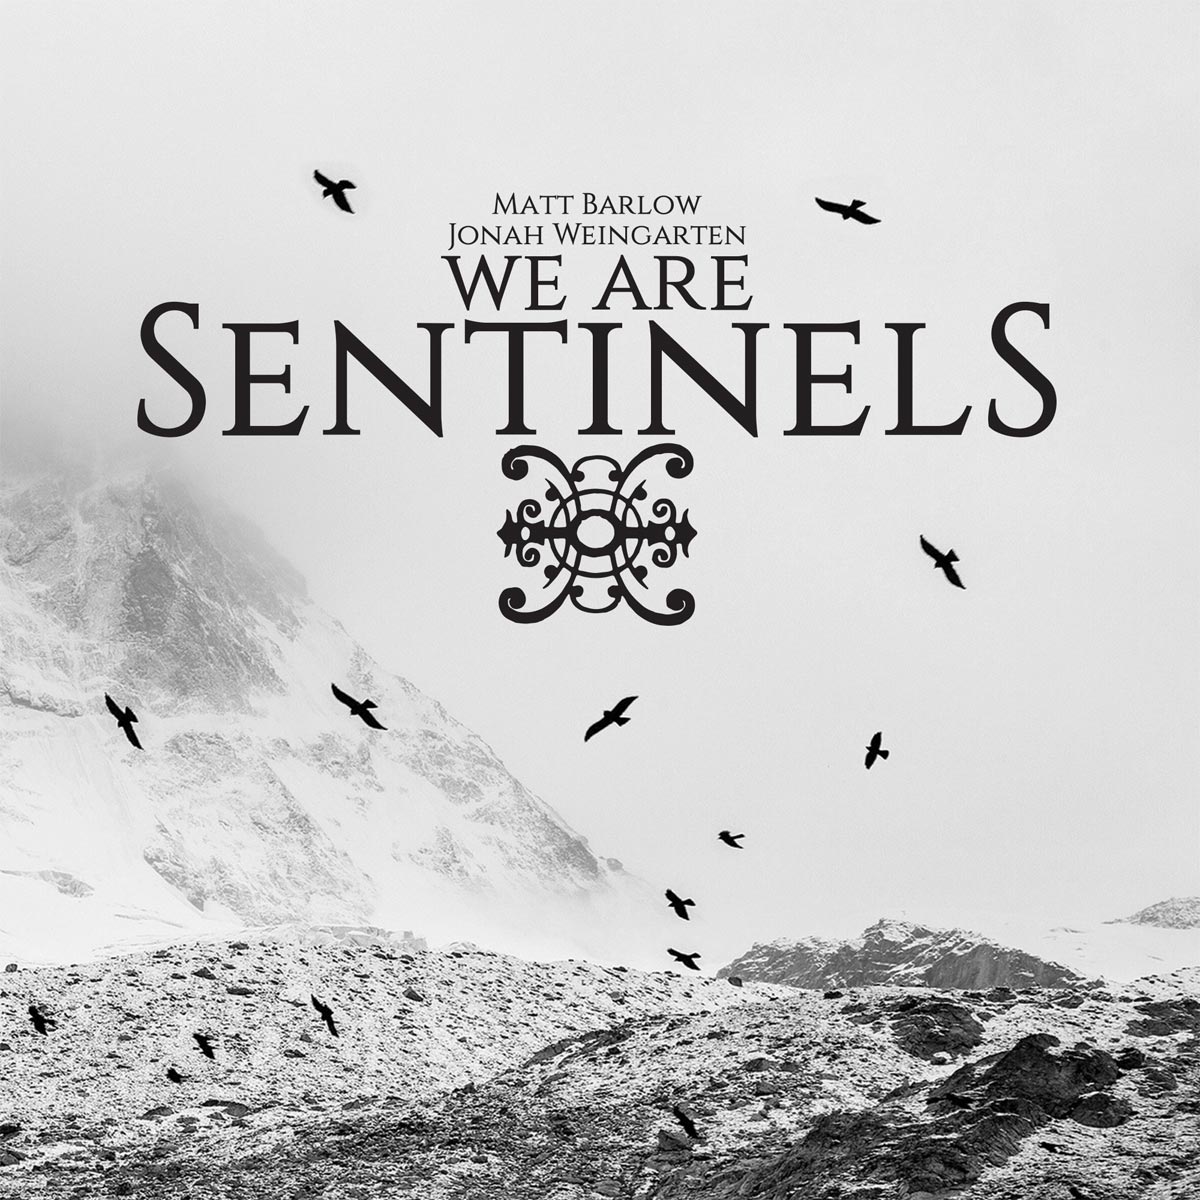 We Are Sentinels